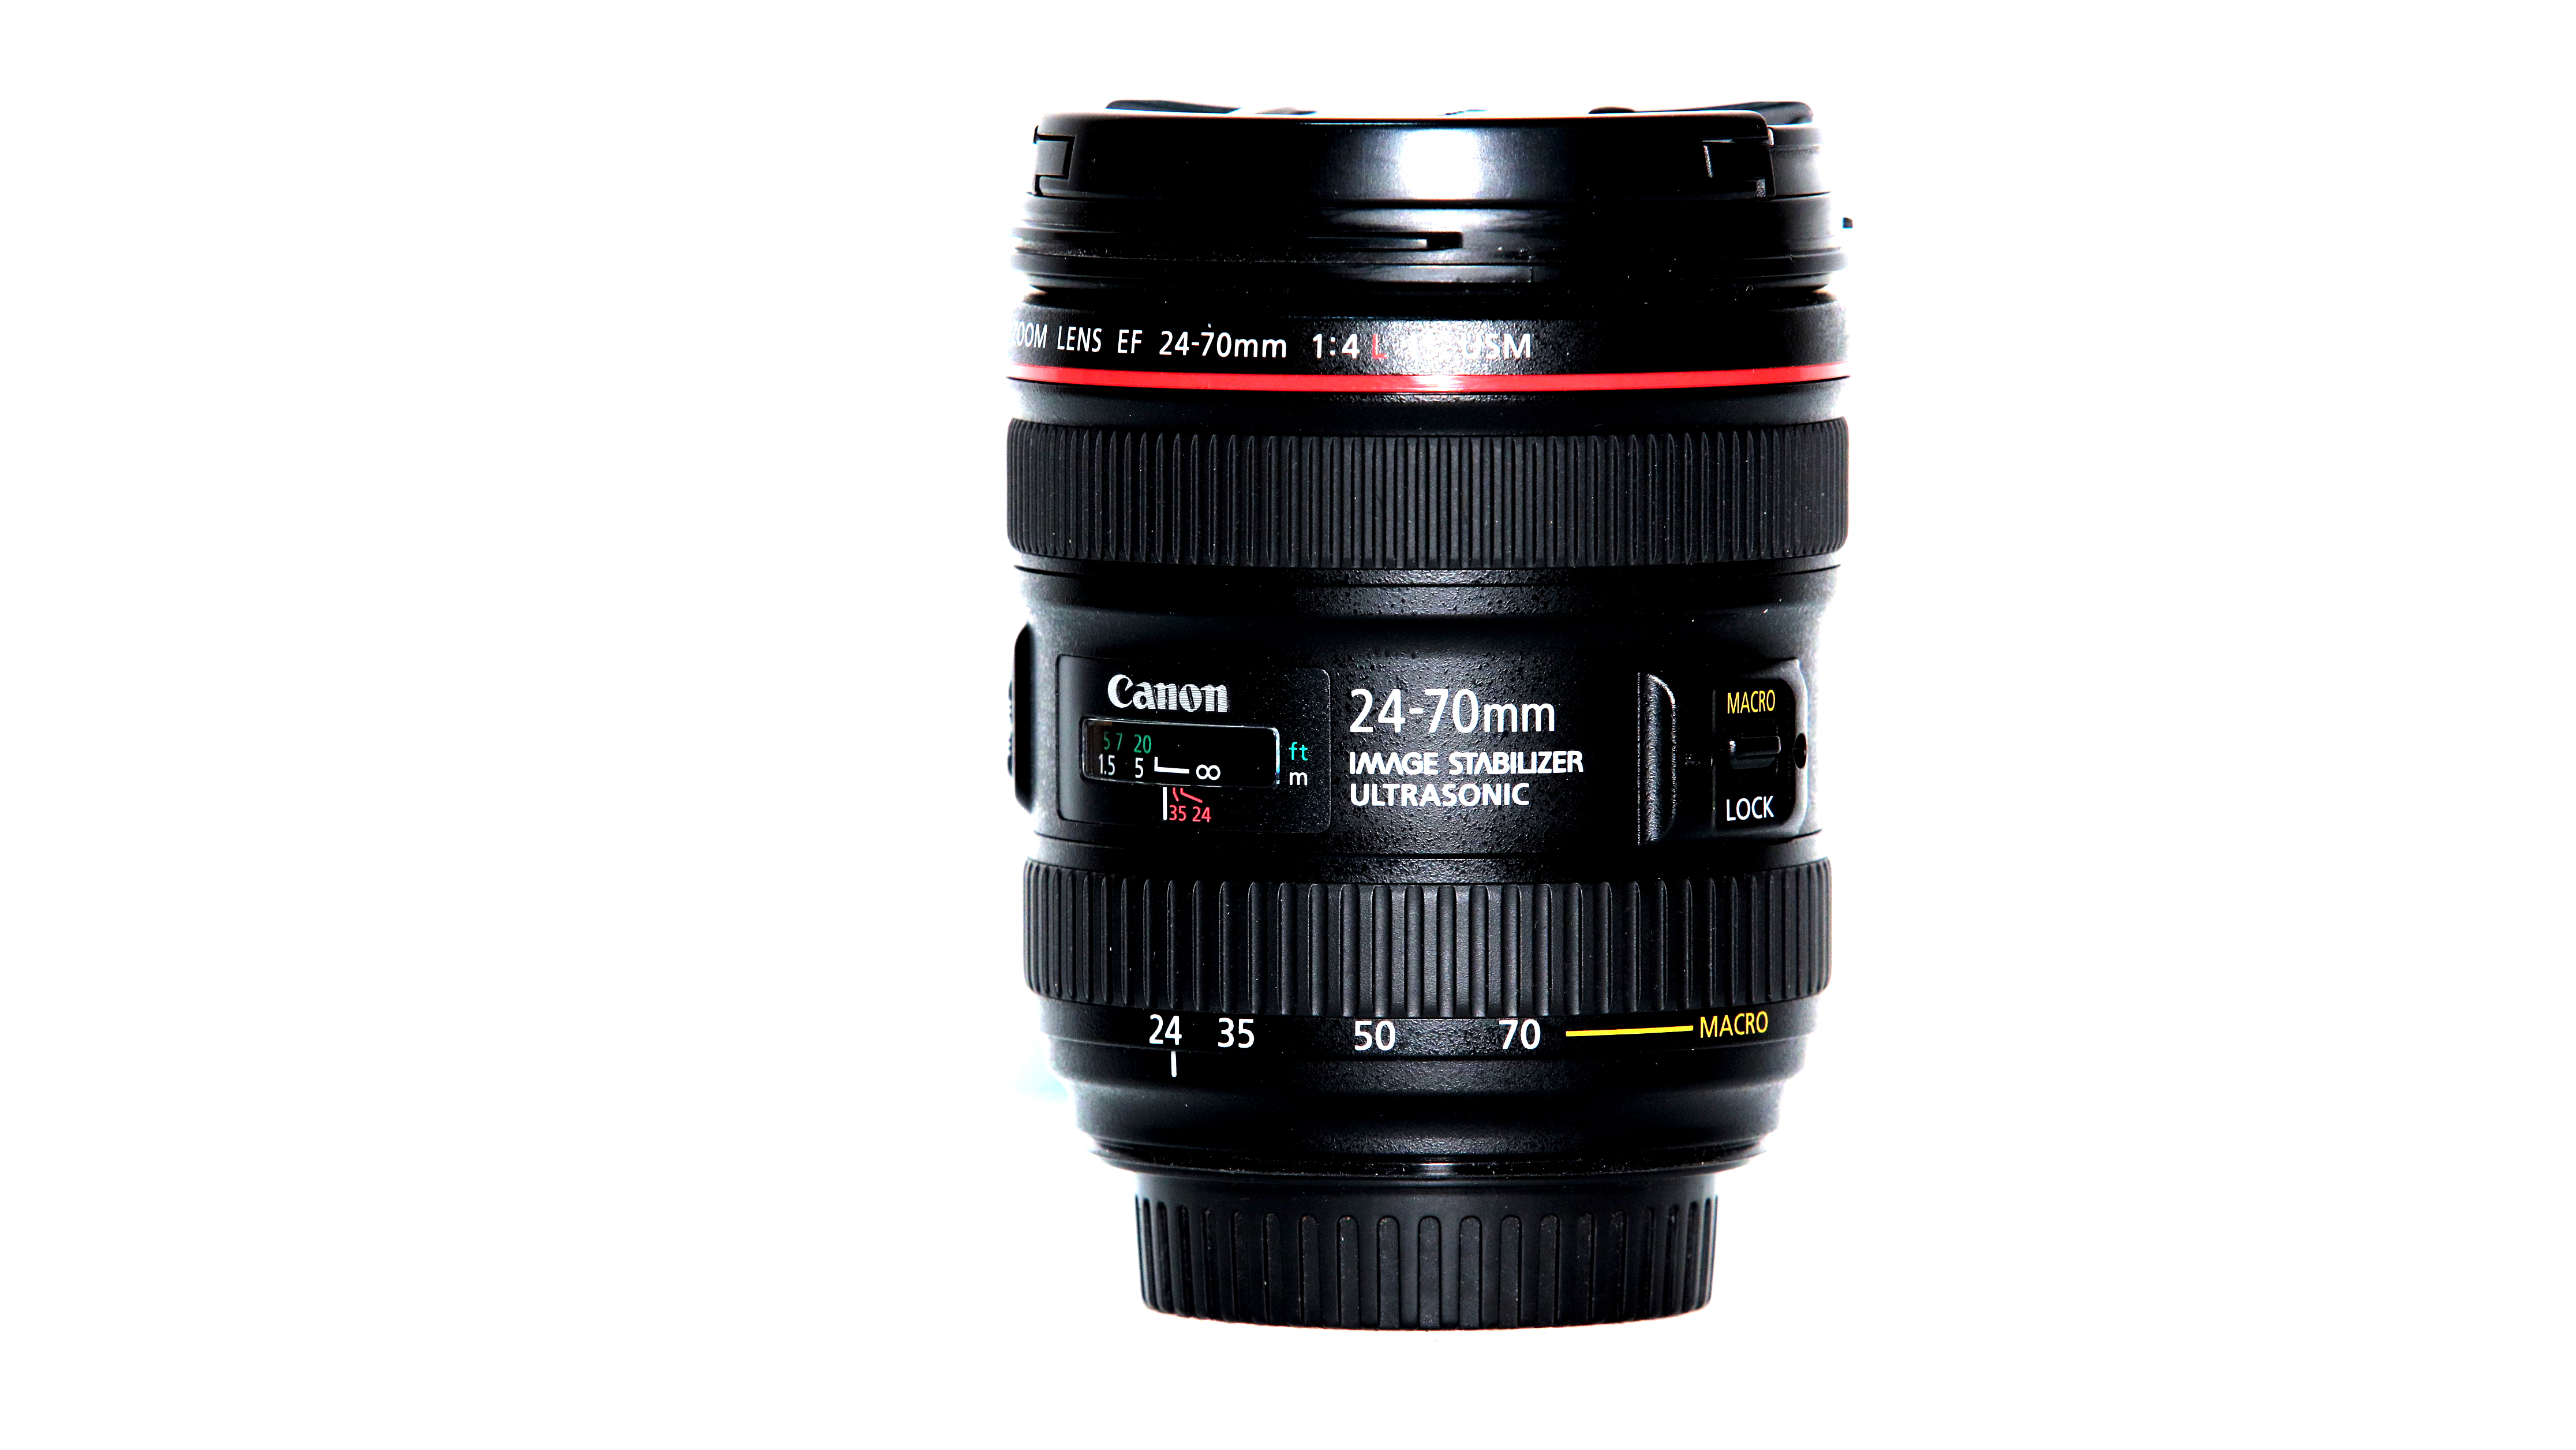 Canon EF 24-70mm f4 Is Usm